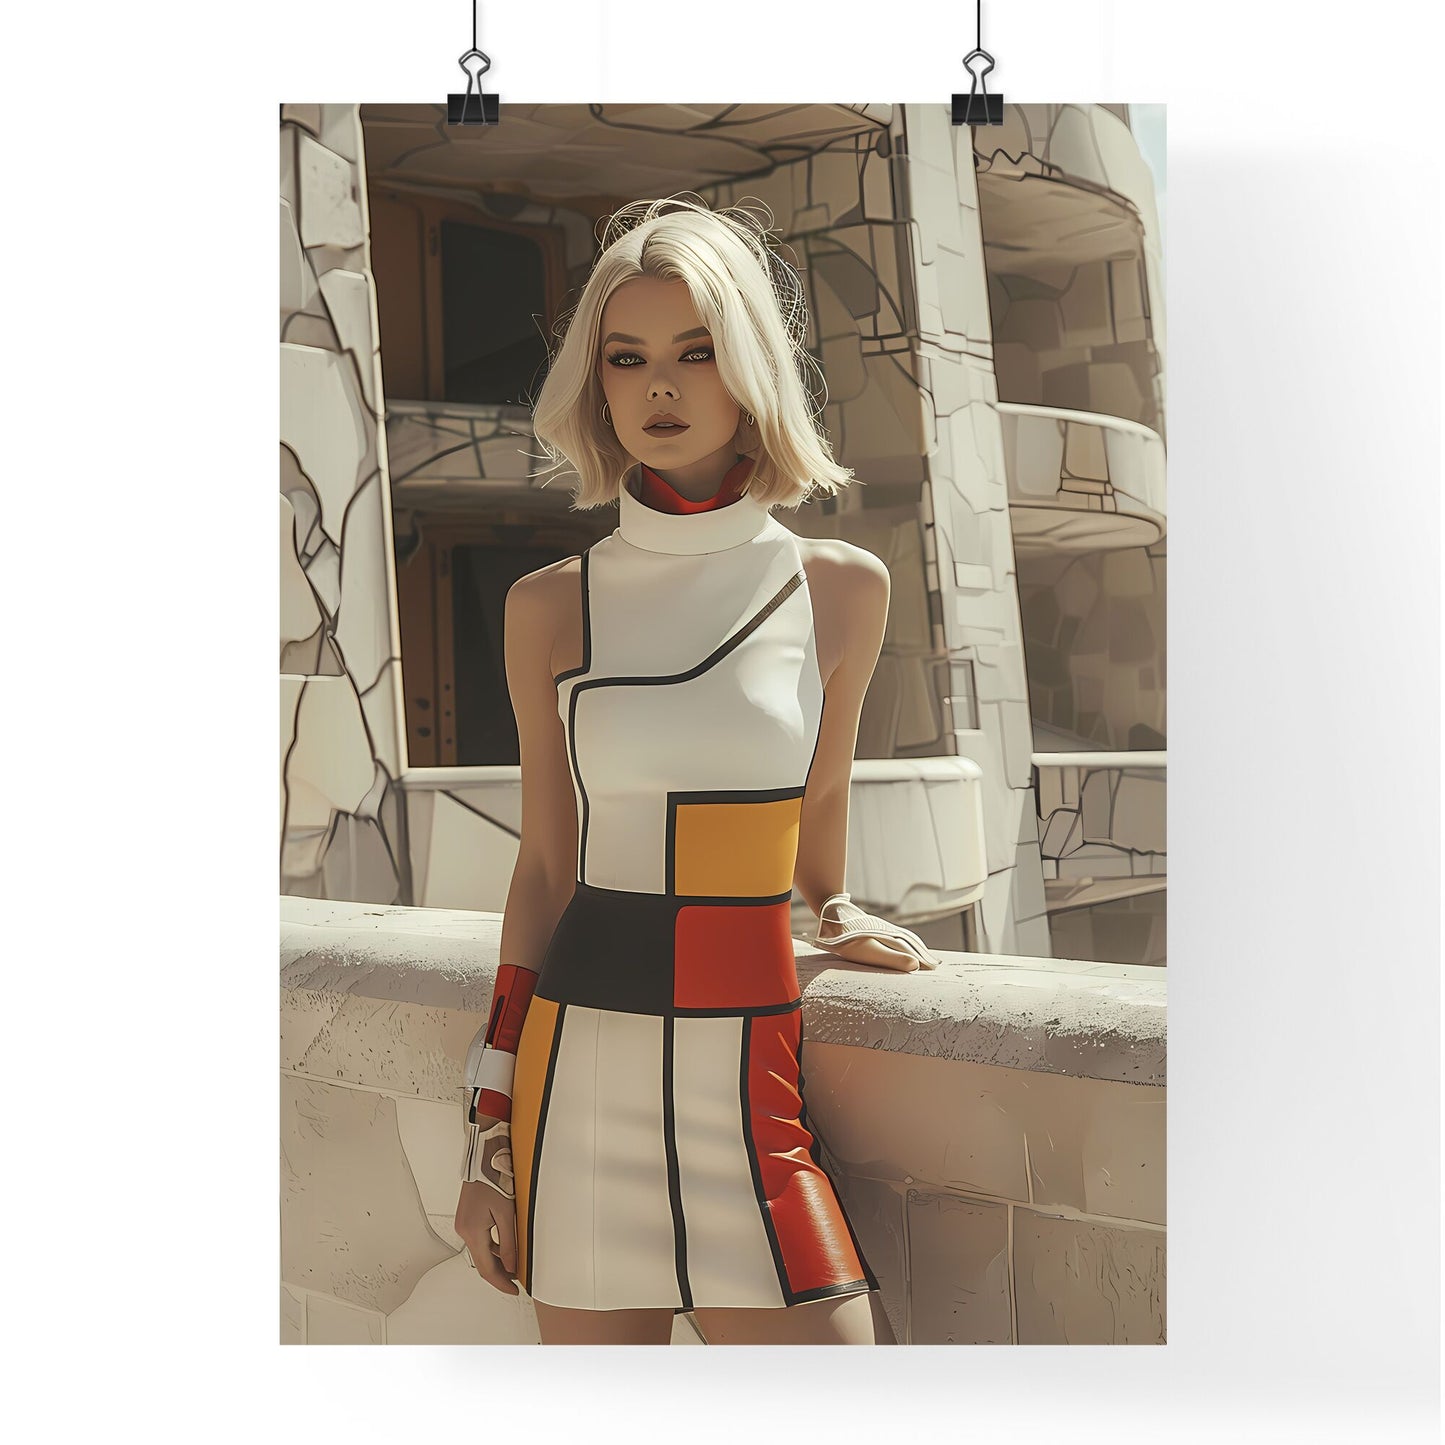 Vibrant Retro Futuristic Painting of a Blonde Woman in a 60s-Inspired Dress and Boots, Minimalist House Background, Art Focus Default Title